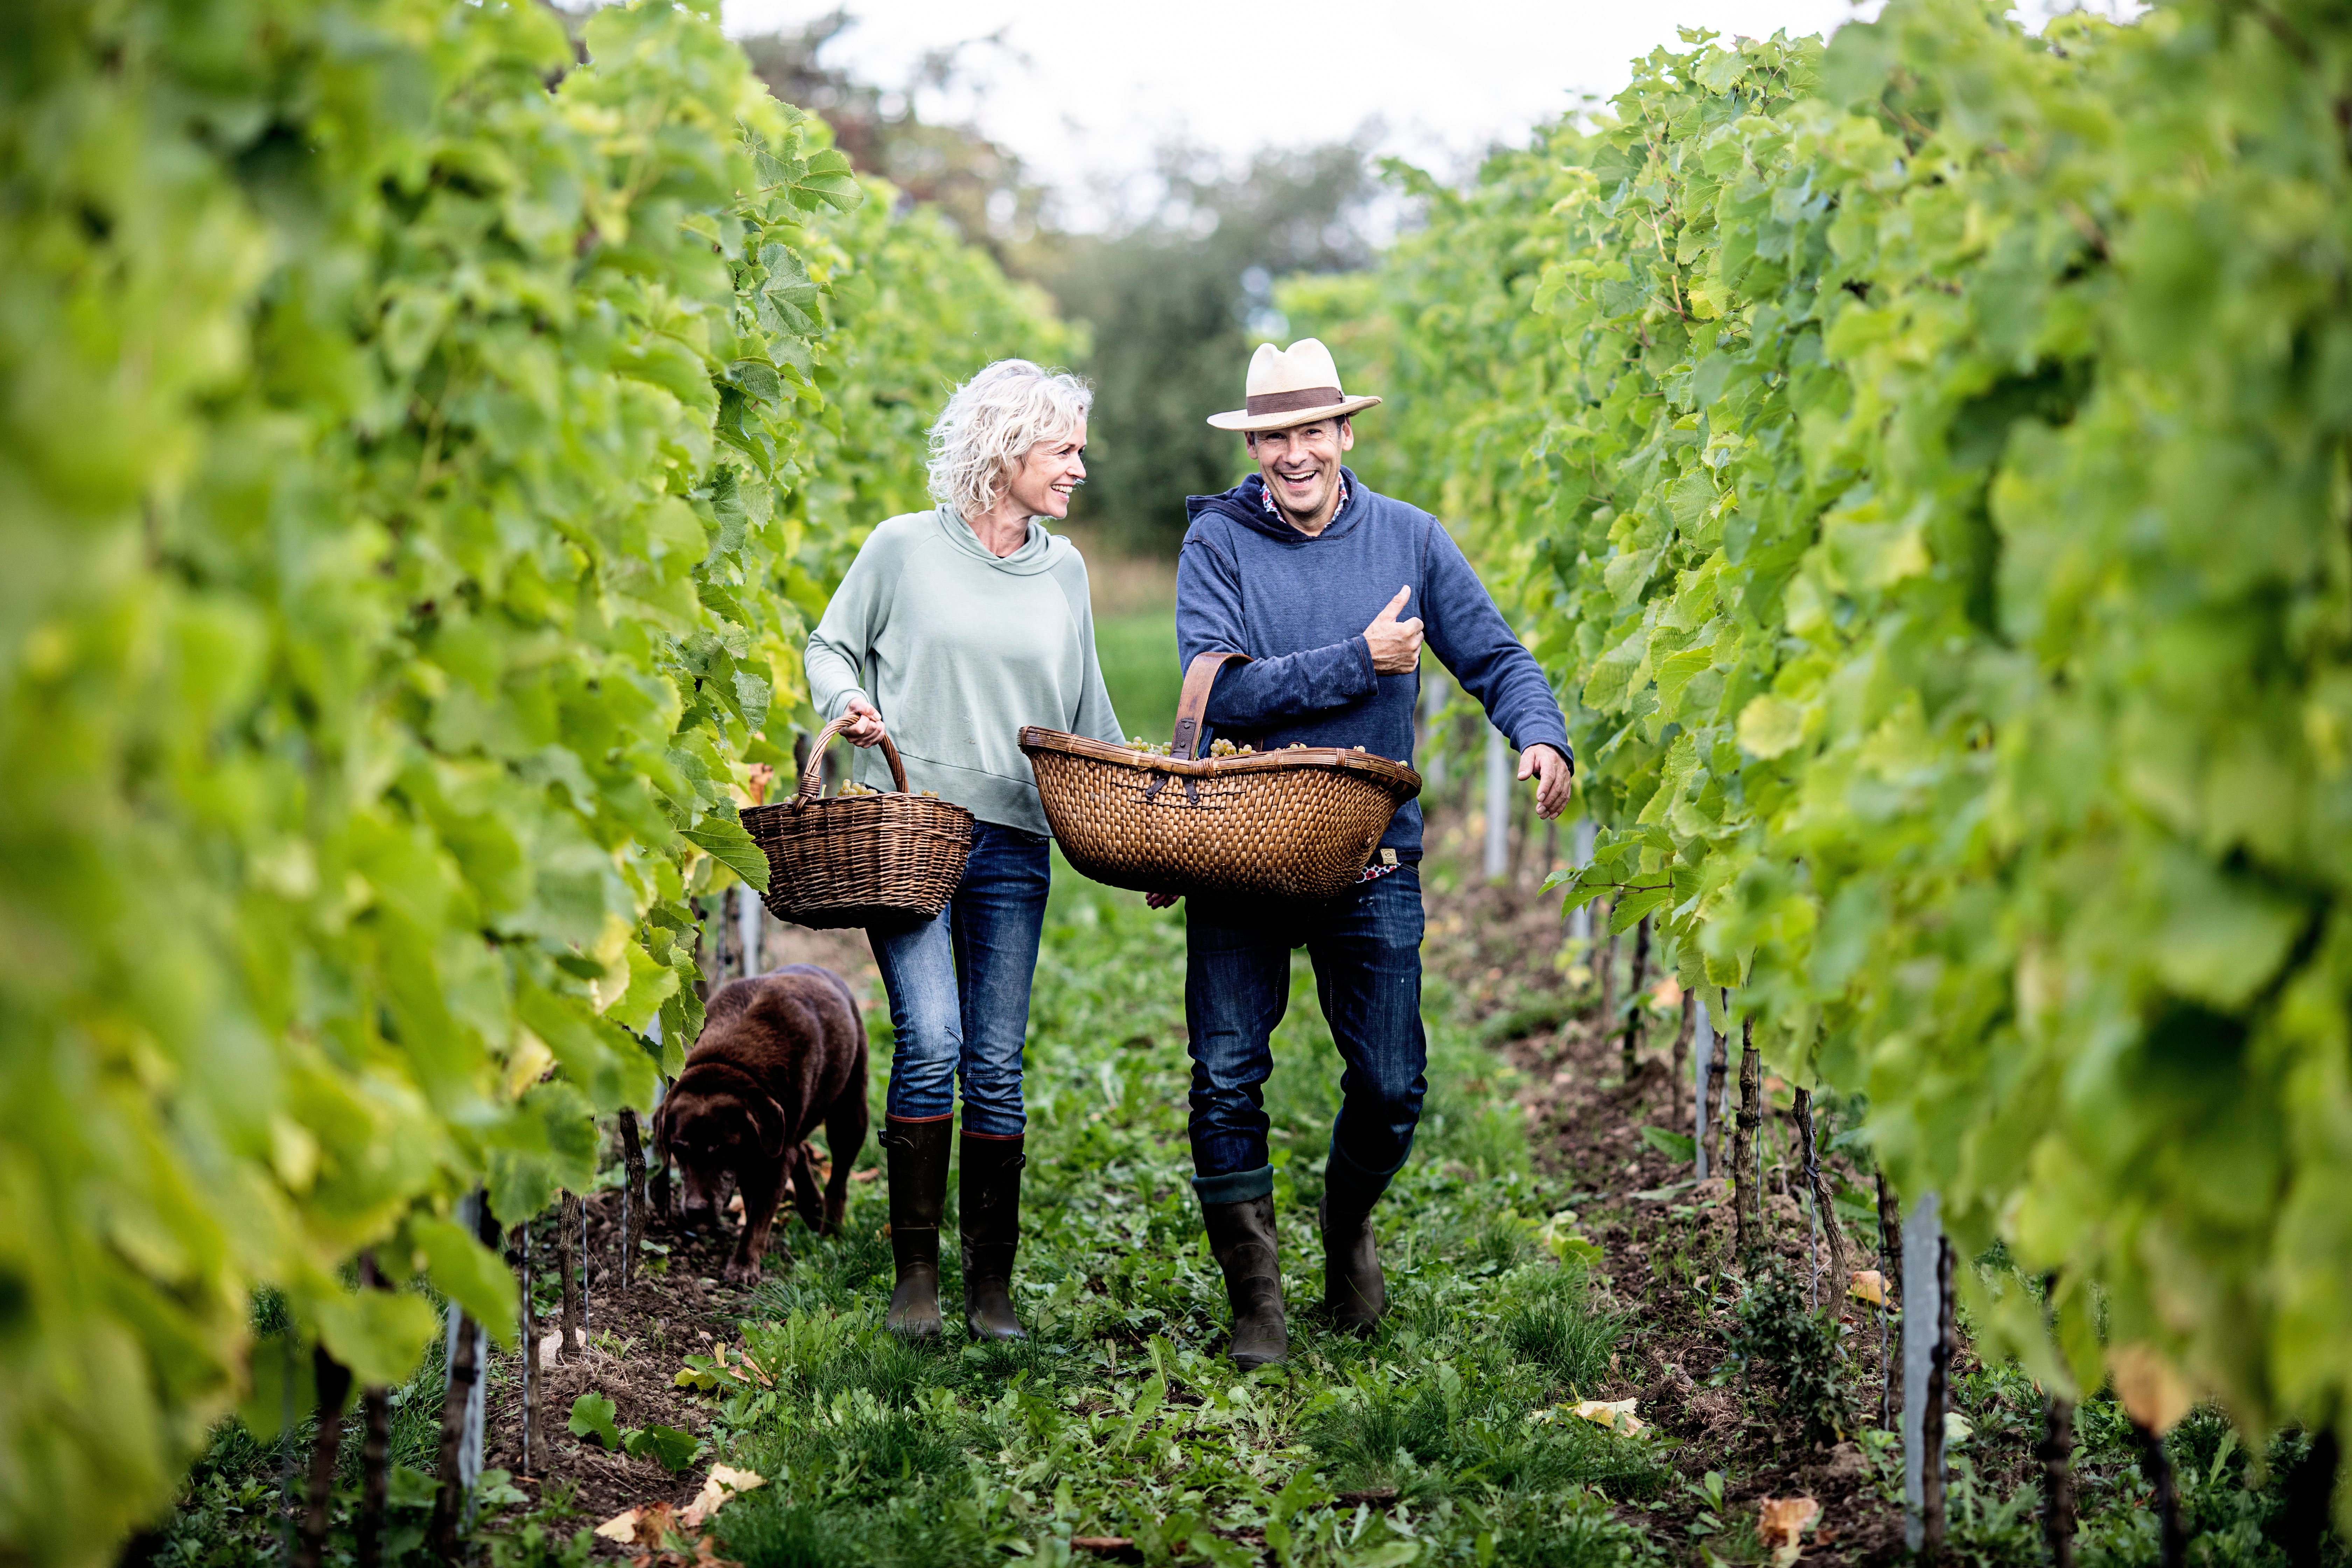 Jacob and Helle Stokkebye planted their first vines in 2009